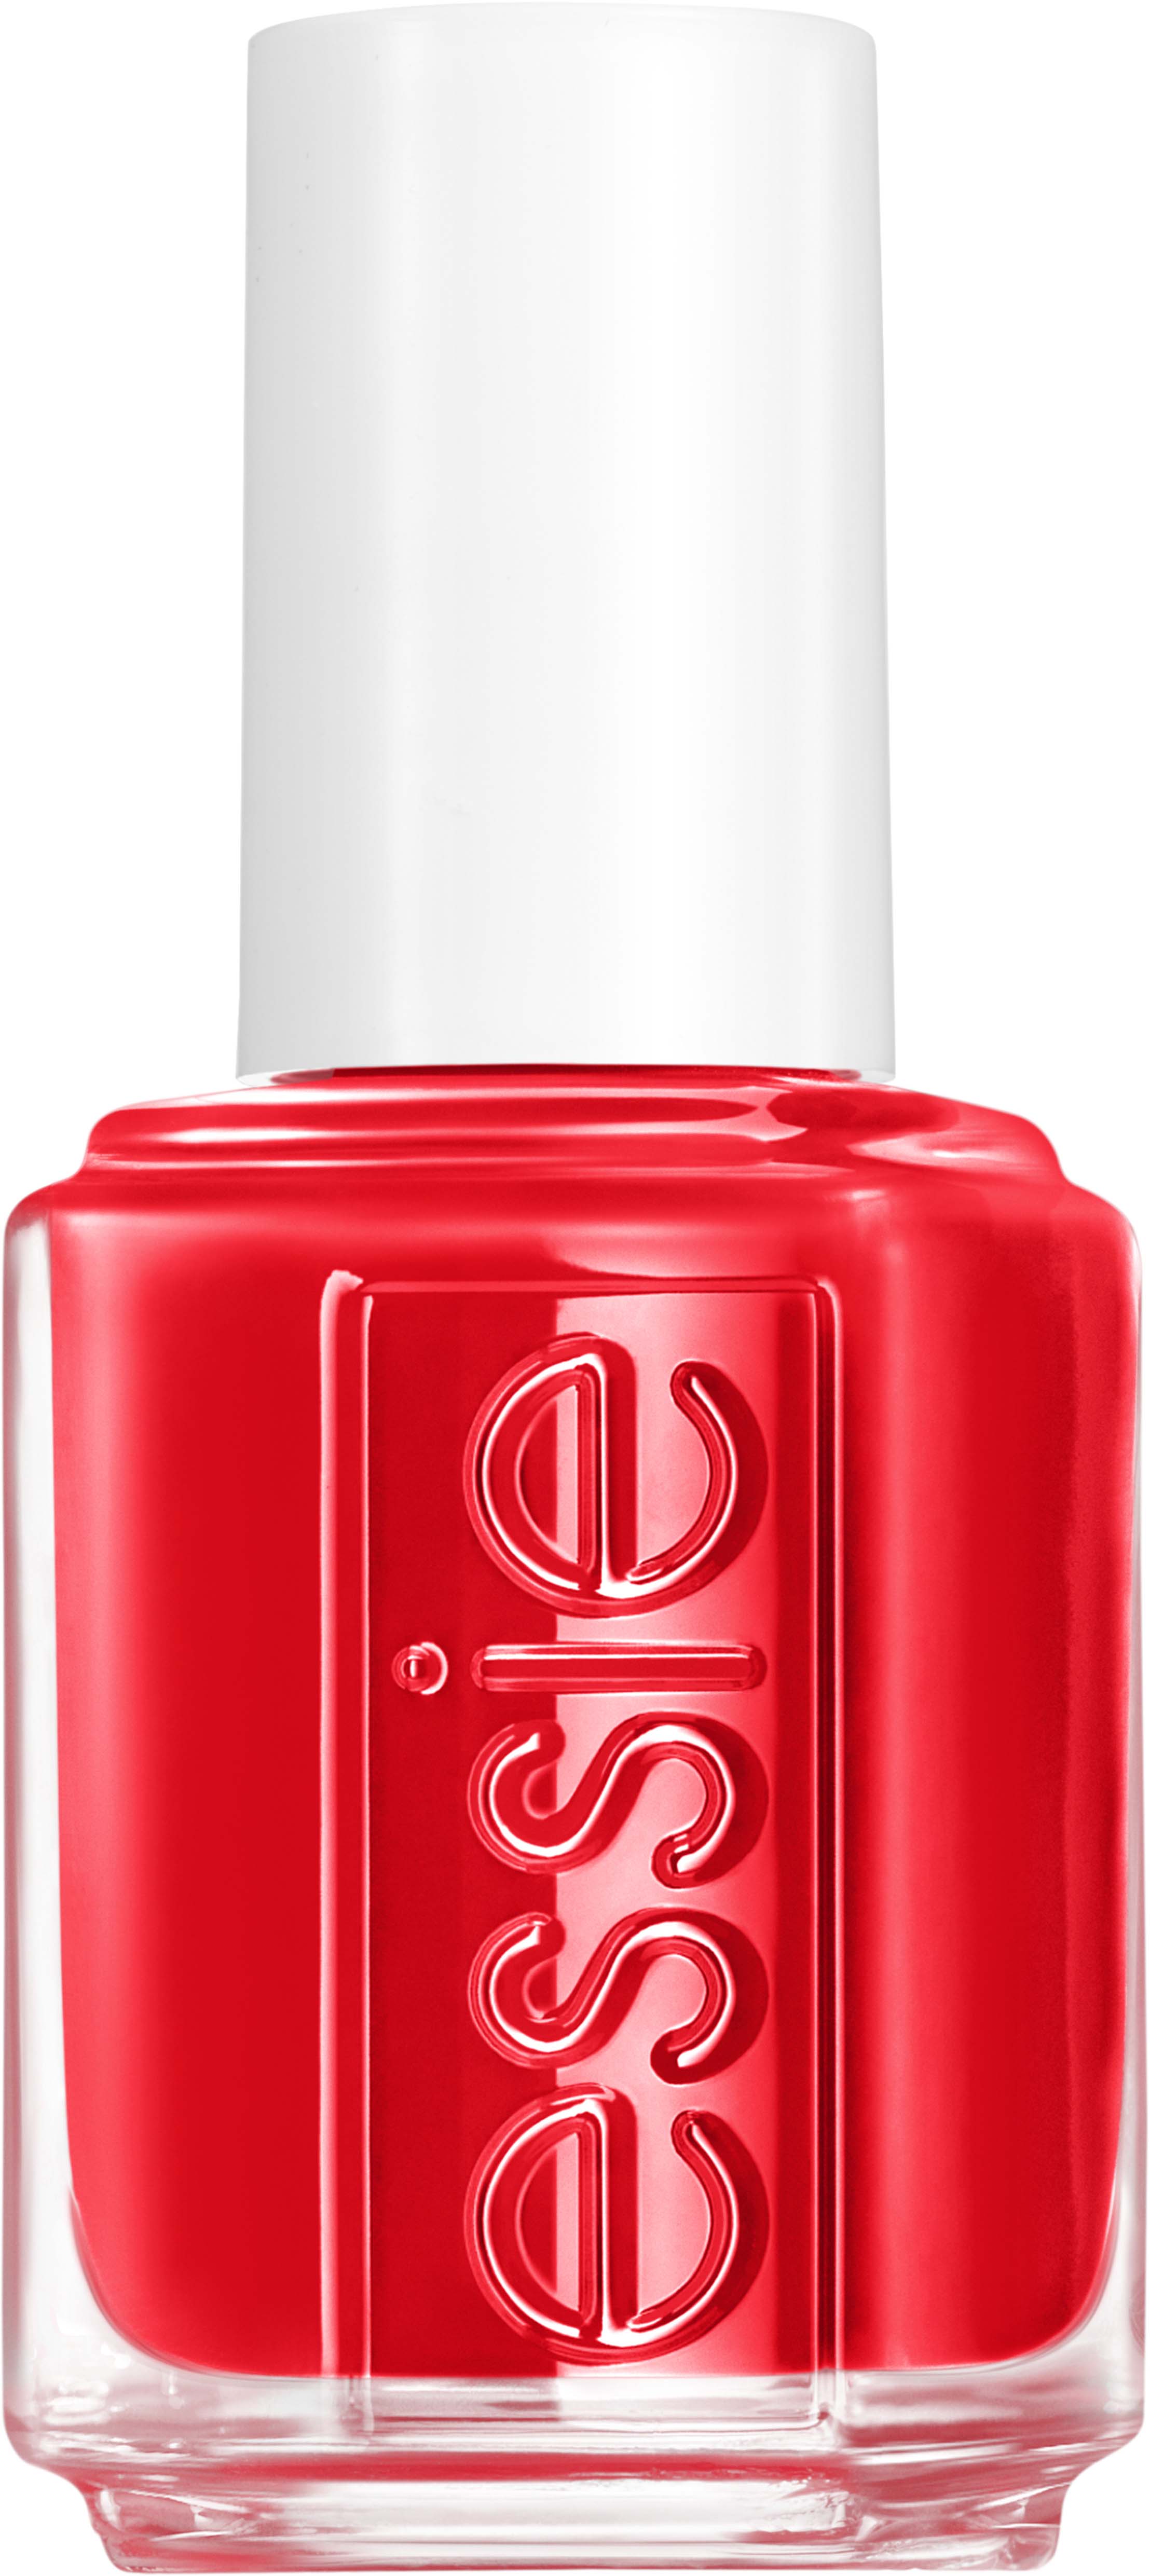 Of Collection Essie Bunches Love Nail Midsummer Laqcuer 781